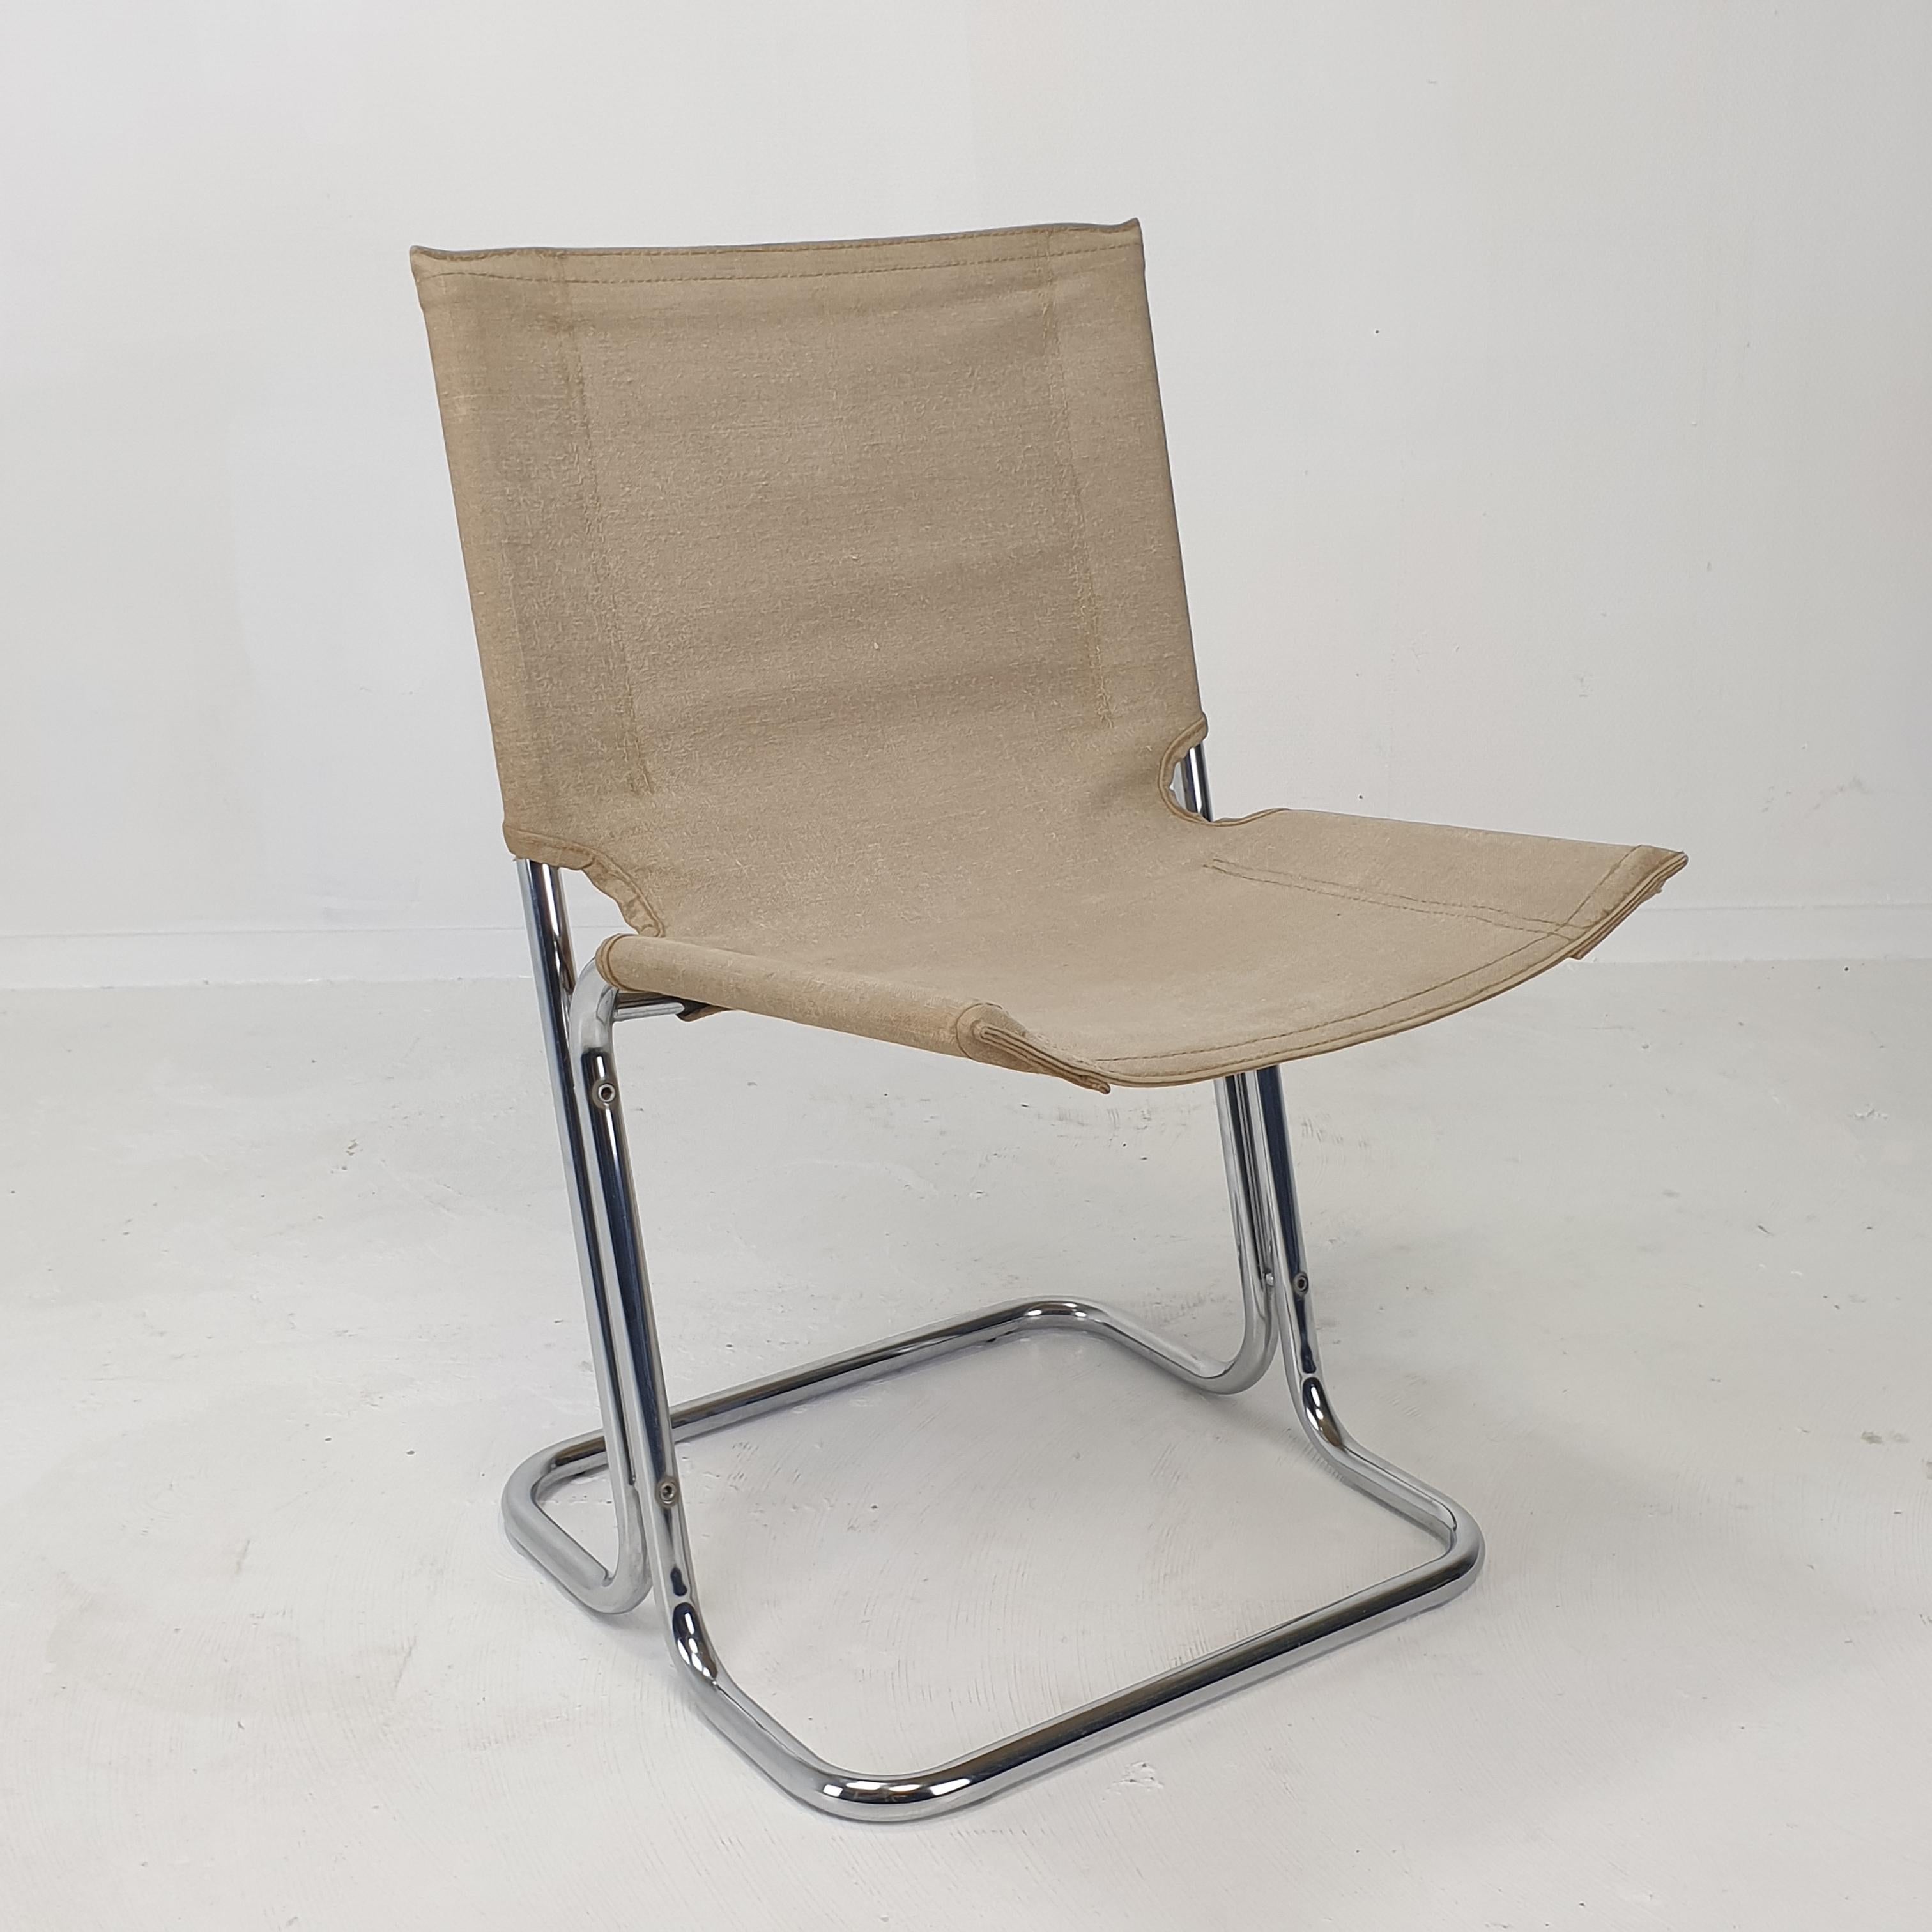 Set of 2 Italian Canvas and Chromed Metal Chairs, 1970's For Sale 8